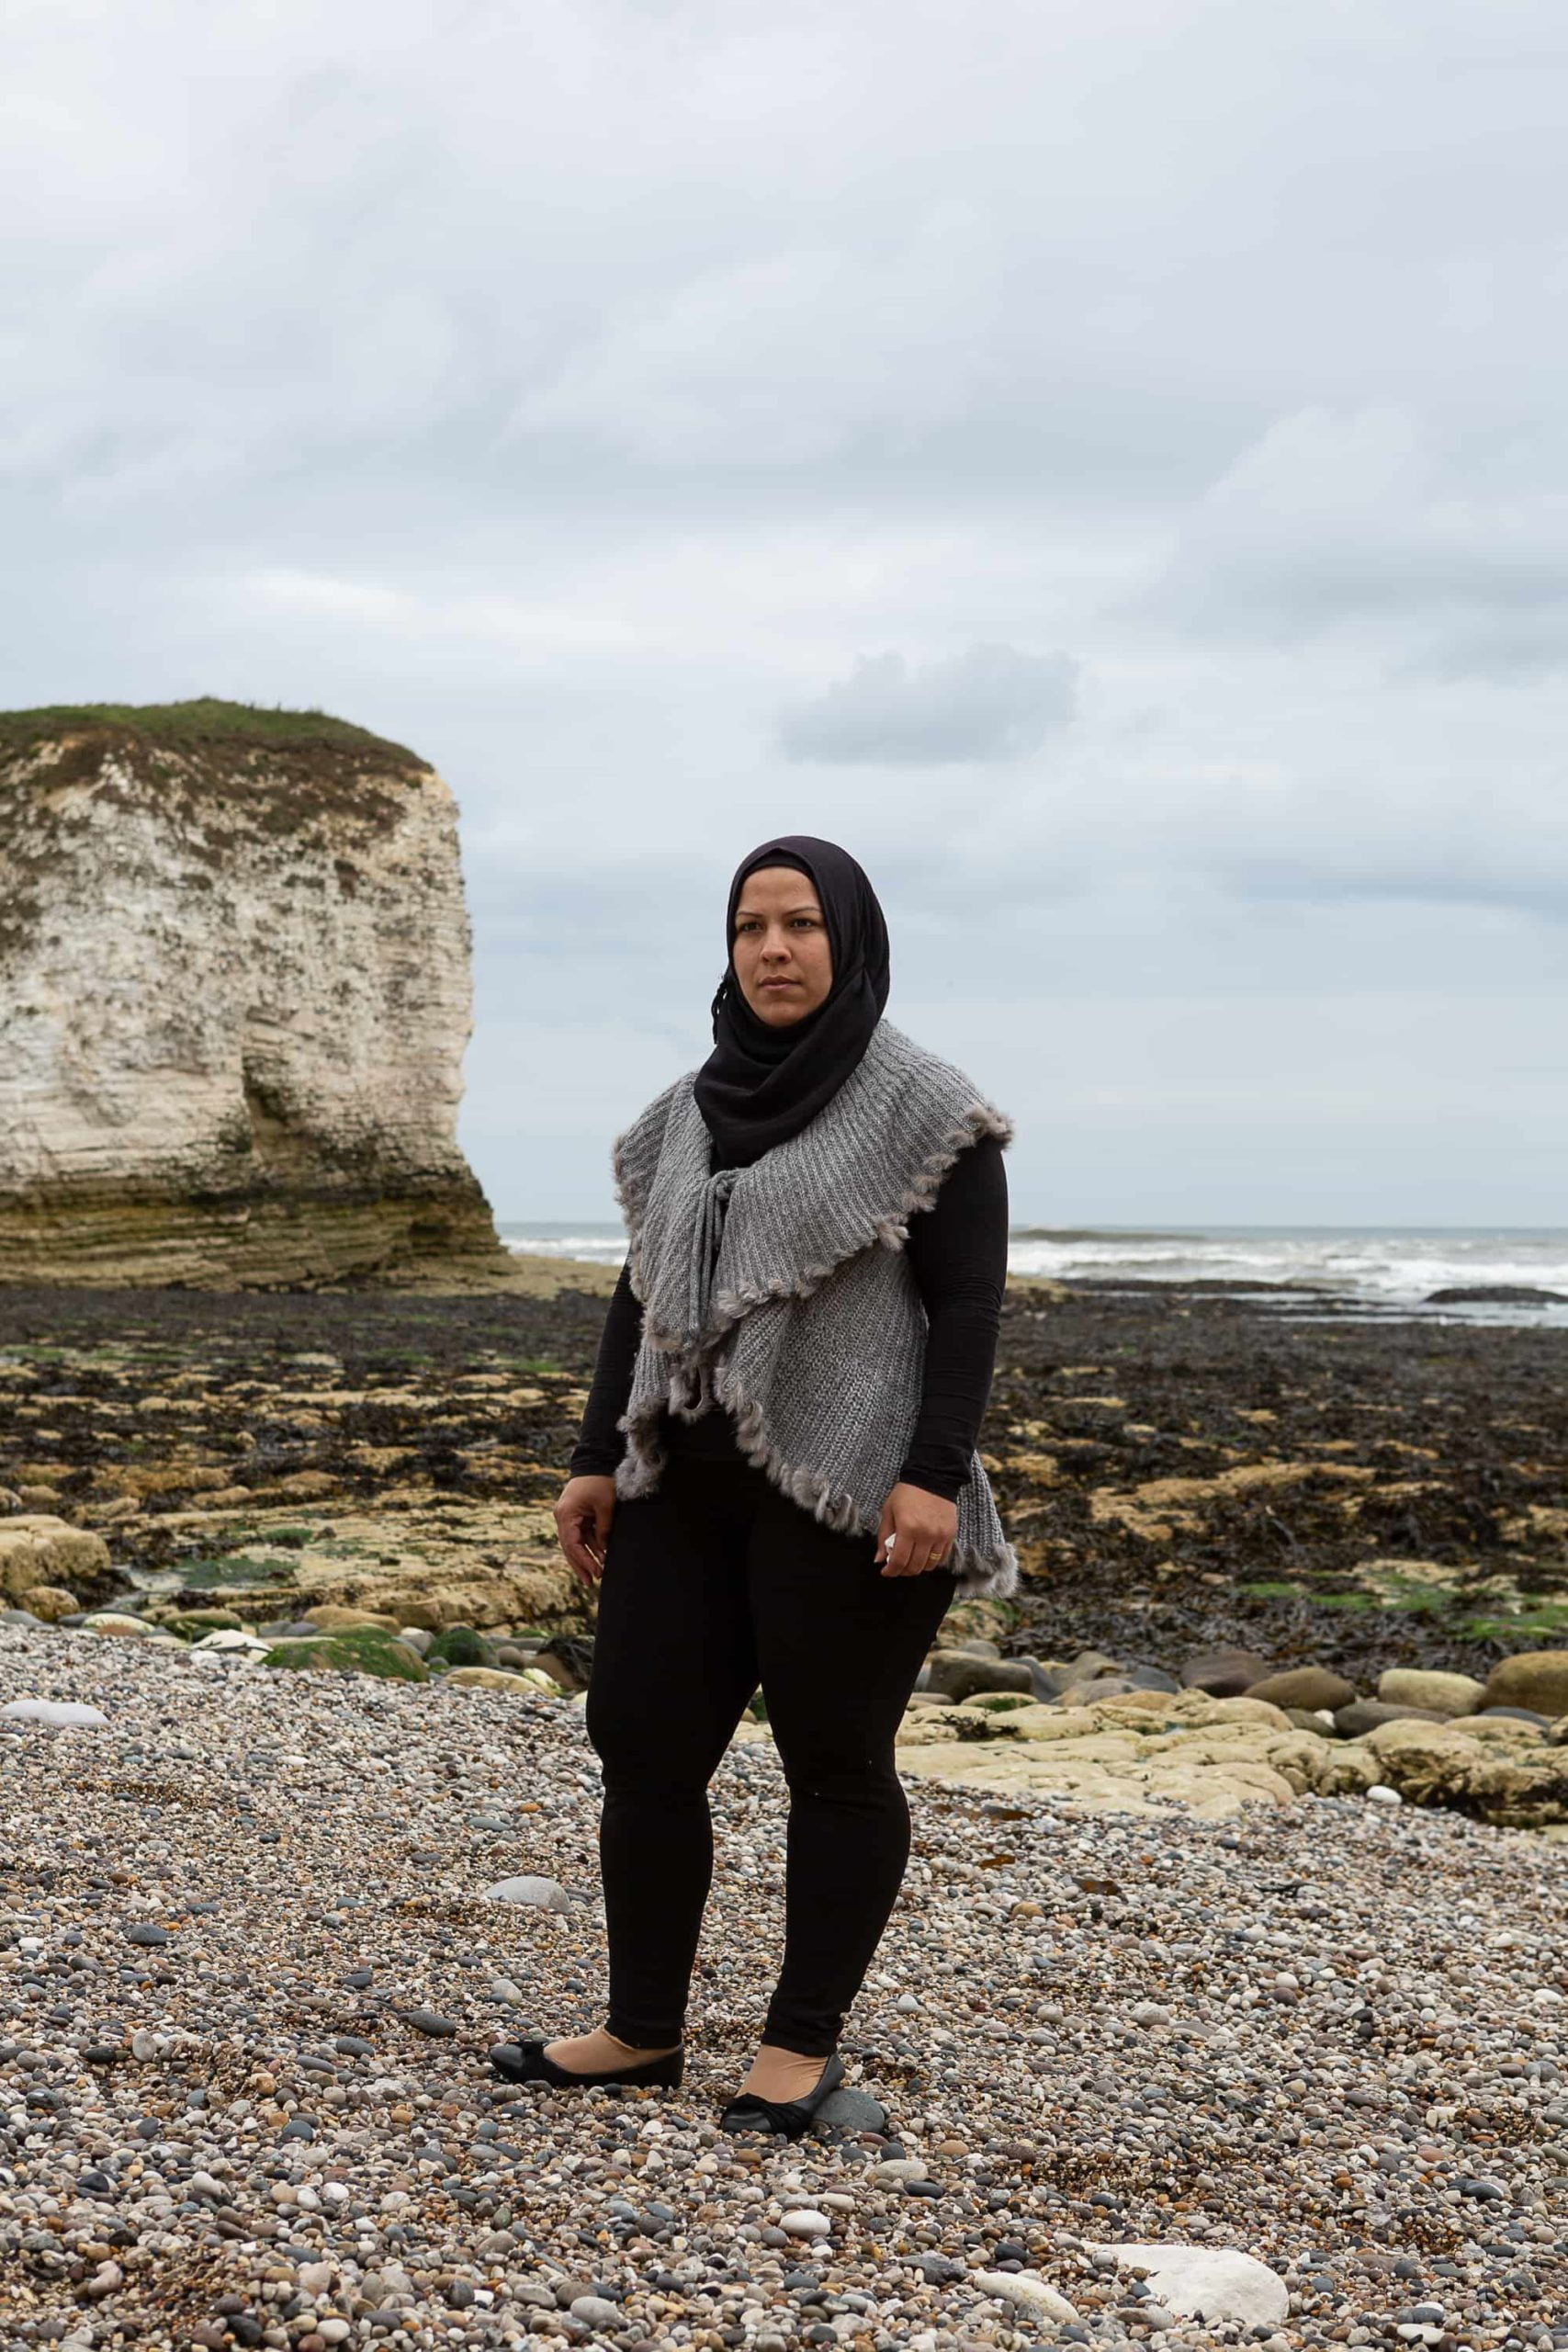 A woman wearing a black headscarf stands on a pebbled beach.